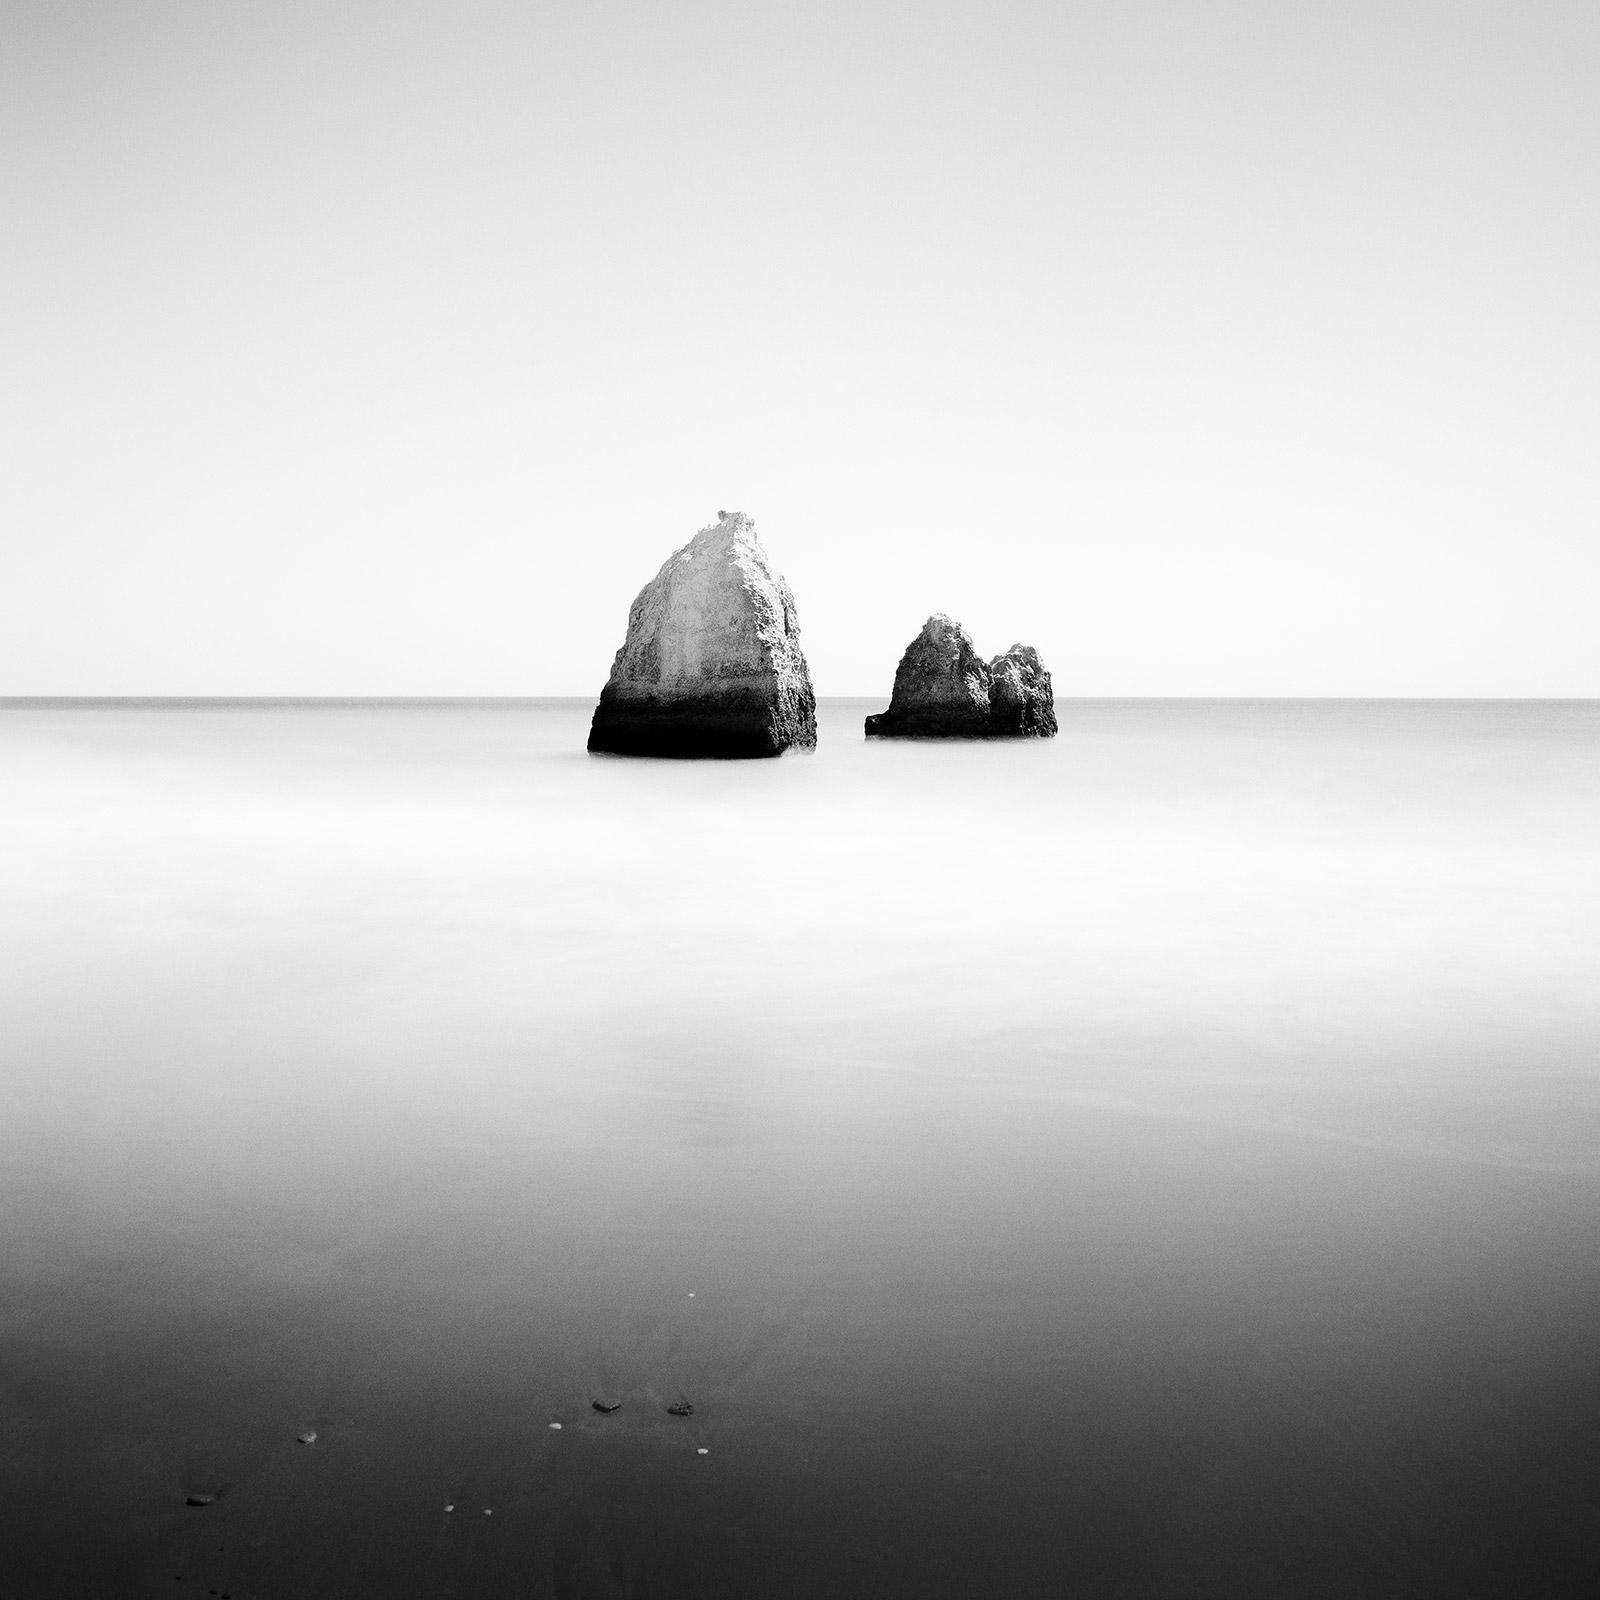 Gerald Berghammer Black and White Photograph - Sunken Pyramid, Spain, minimalist black and white art photography, landscape